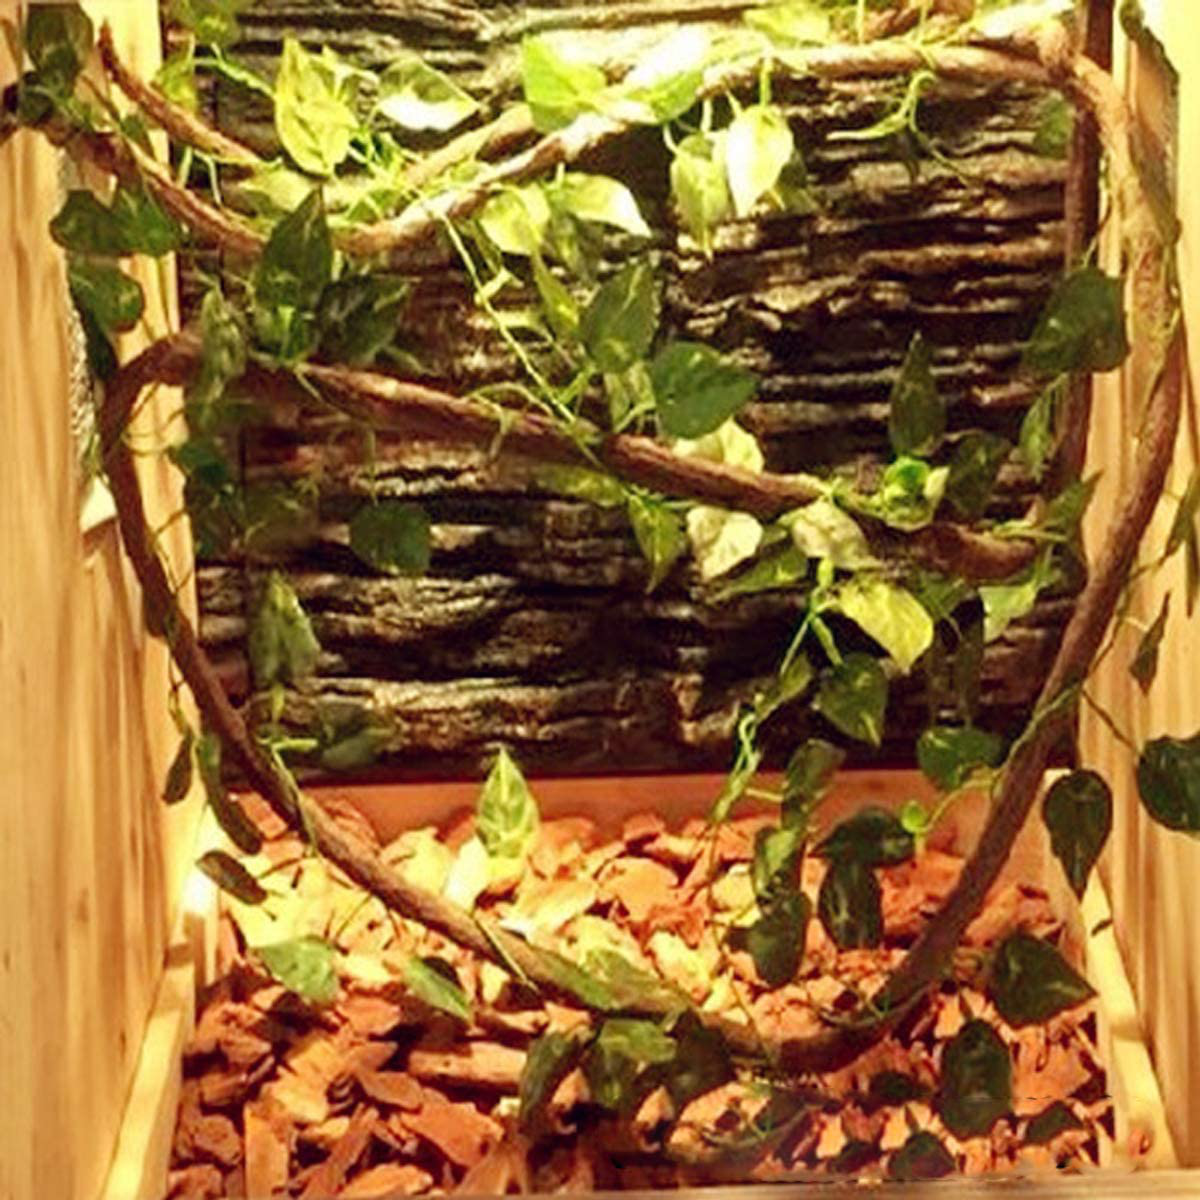 PINVNBY Bearded Dragon Hammock Jungle Climber Vines Flexible Reptile Leaves with Suction Cups Habitat Decor for Climbing, Chameleon, Lizards, Gecko, Snakes Animals & Pet Supplies > Pet Supplies > Reptile & Amphibian Supplies > Reptile & Amphibian Habitat Accessories PIVBY   